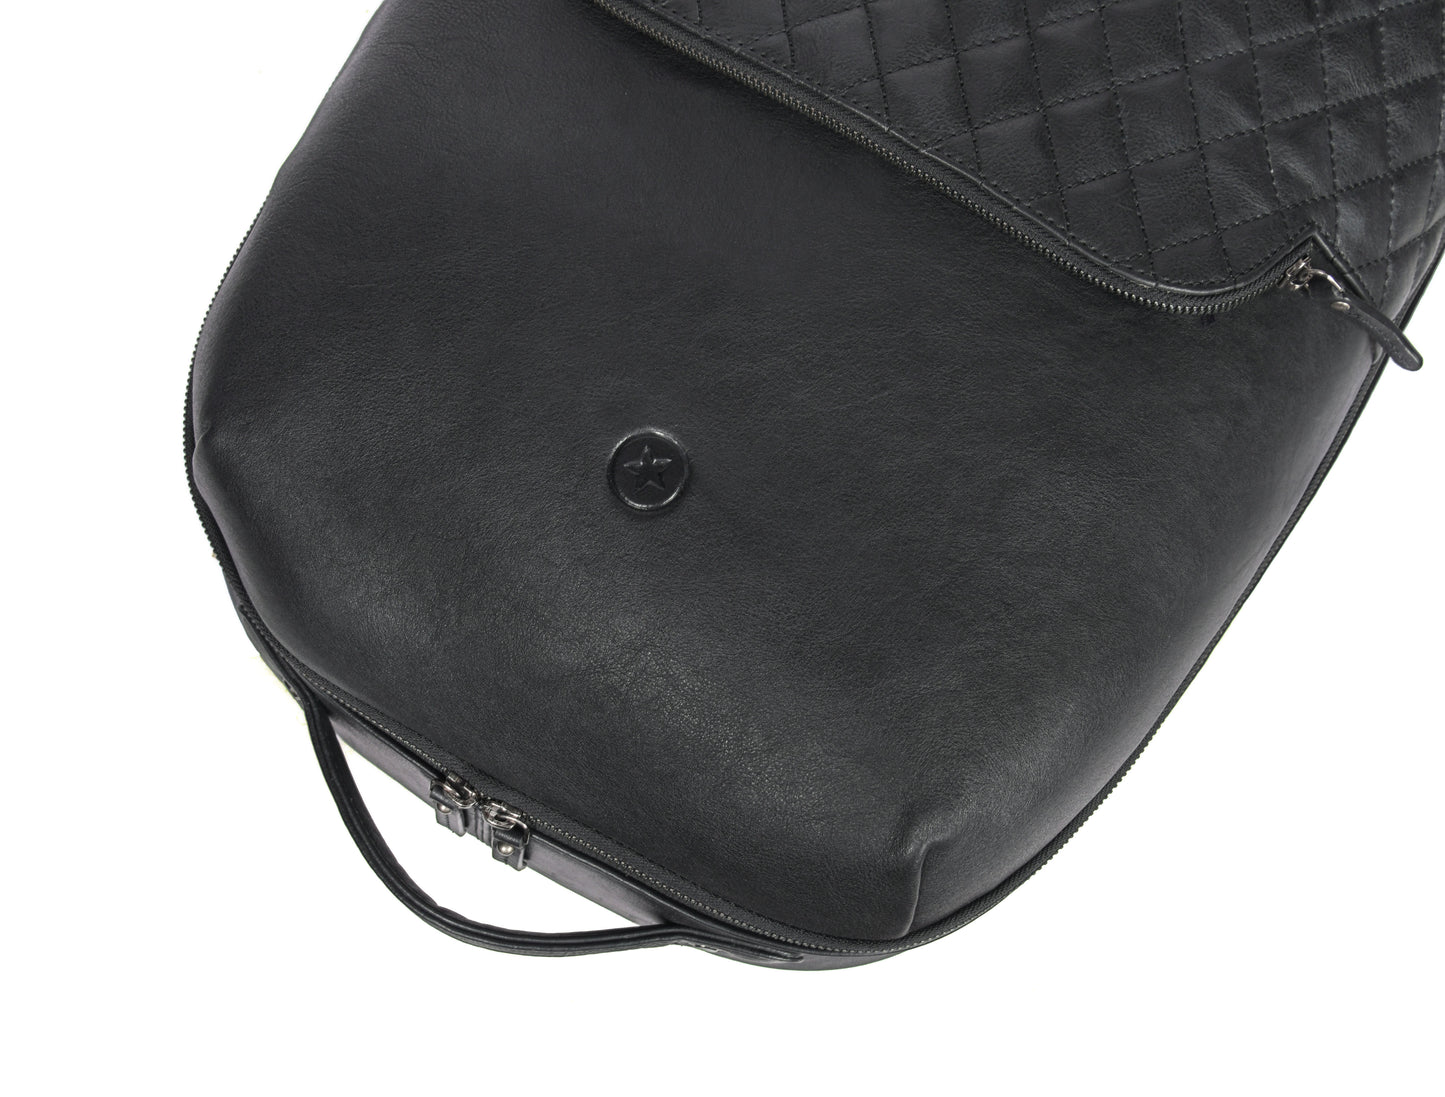 Atria Upcycled Leather Trolley Backpack - Black